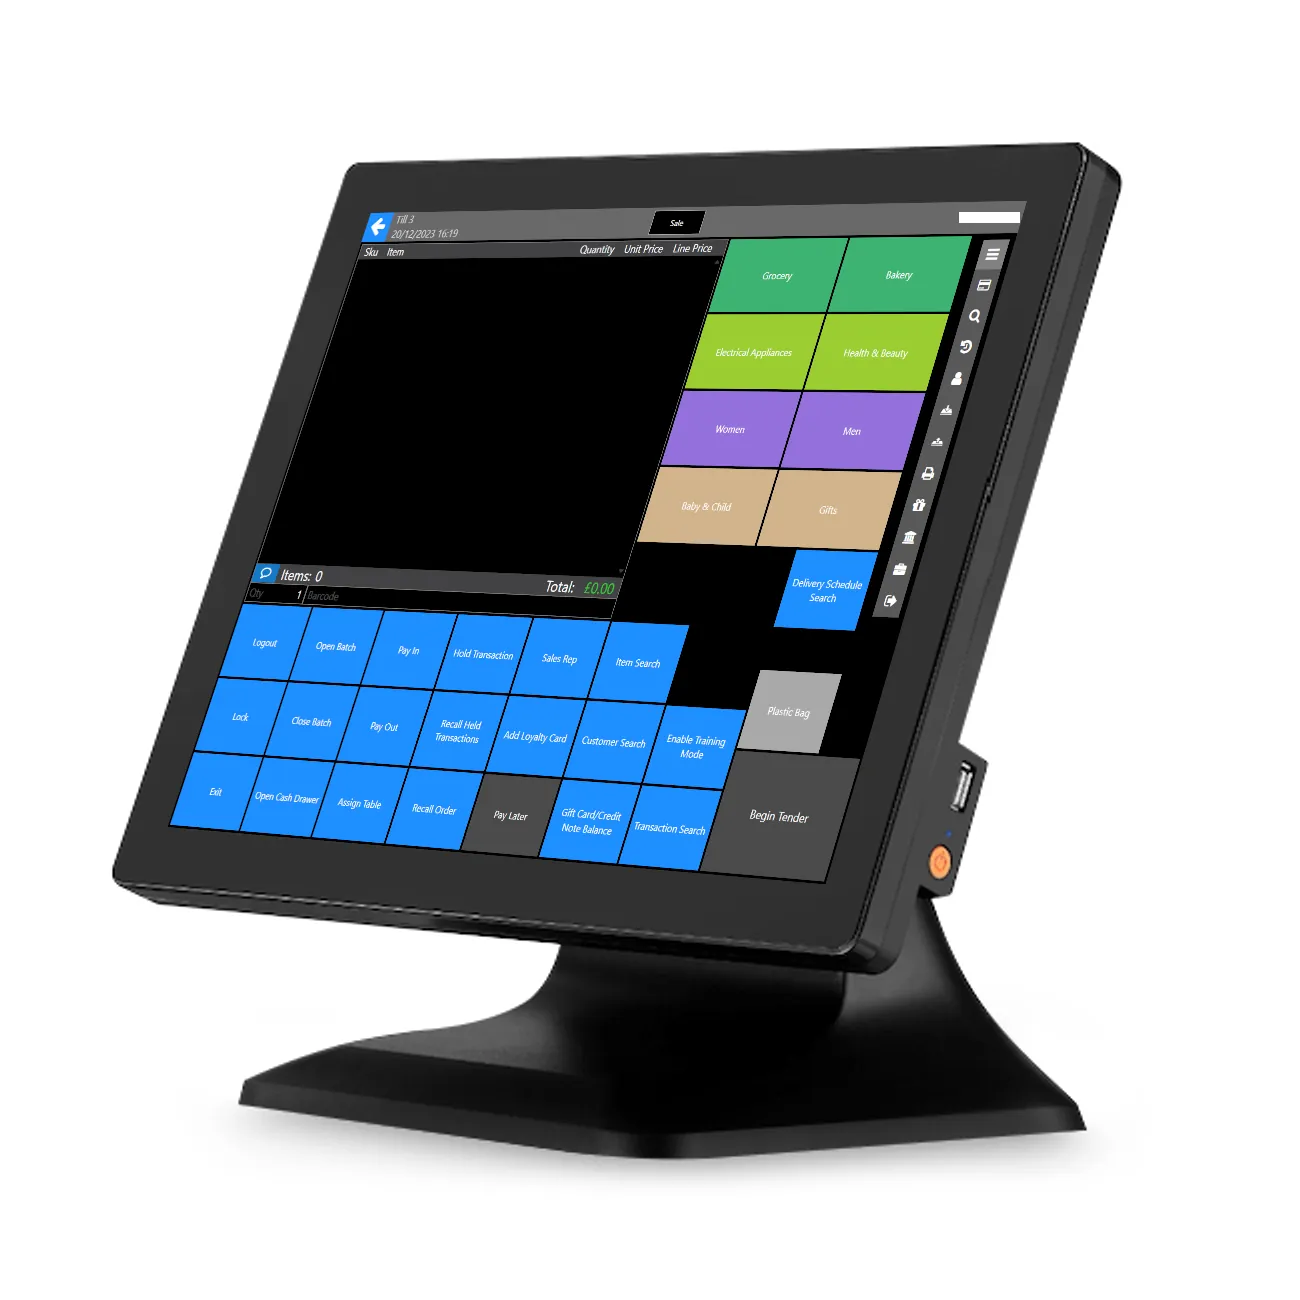 OXHOO ONIX 500 EPOS System Black Front View